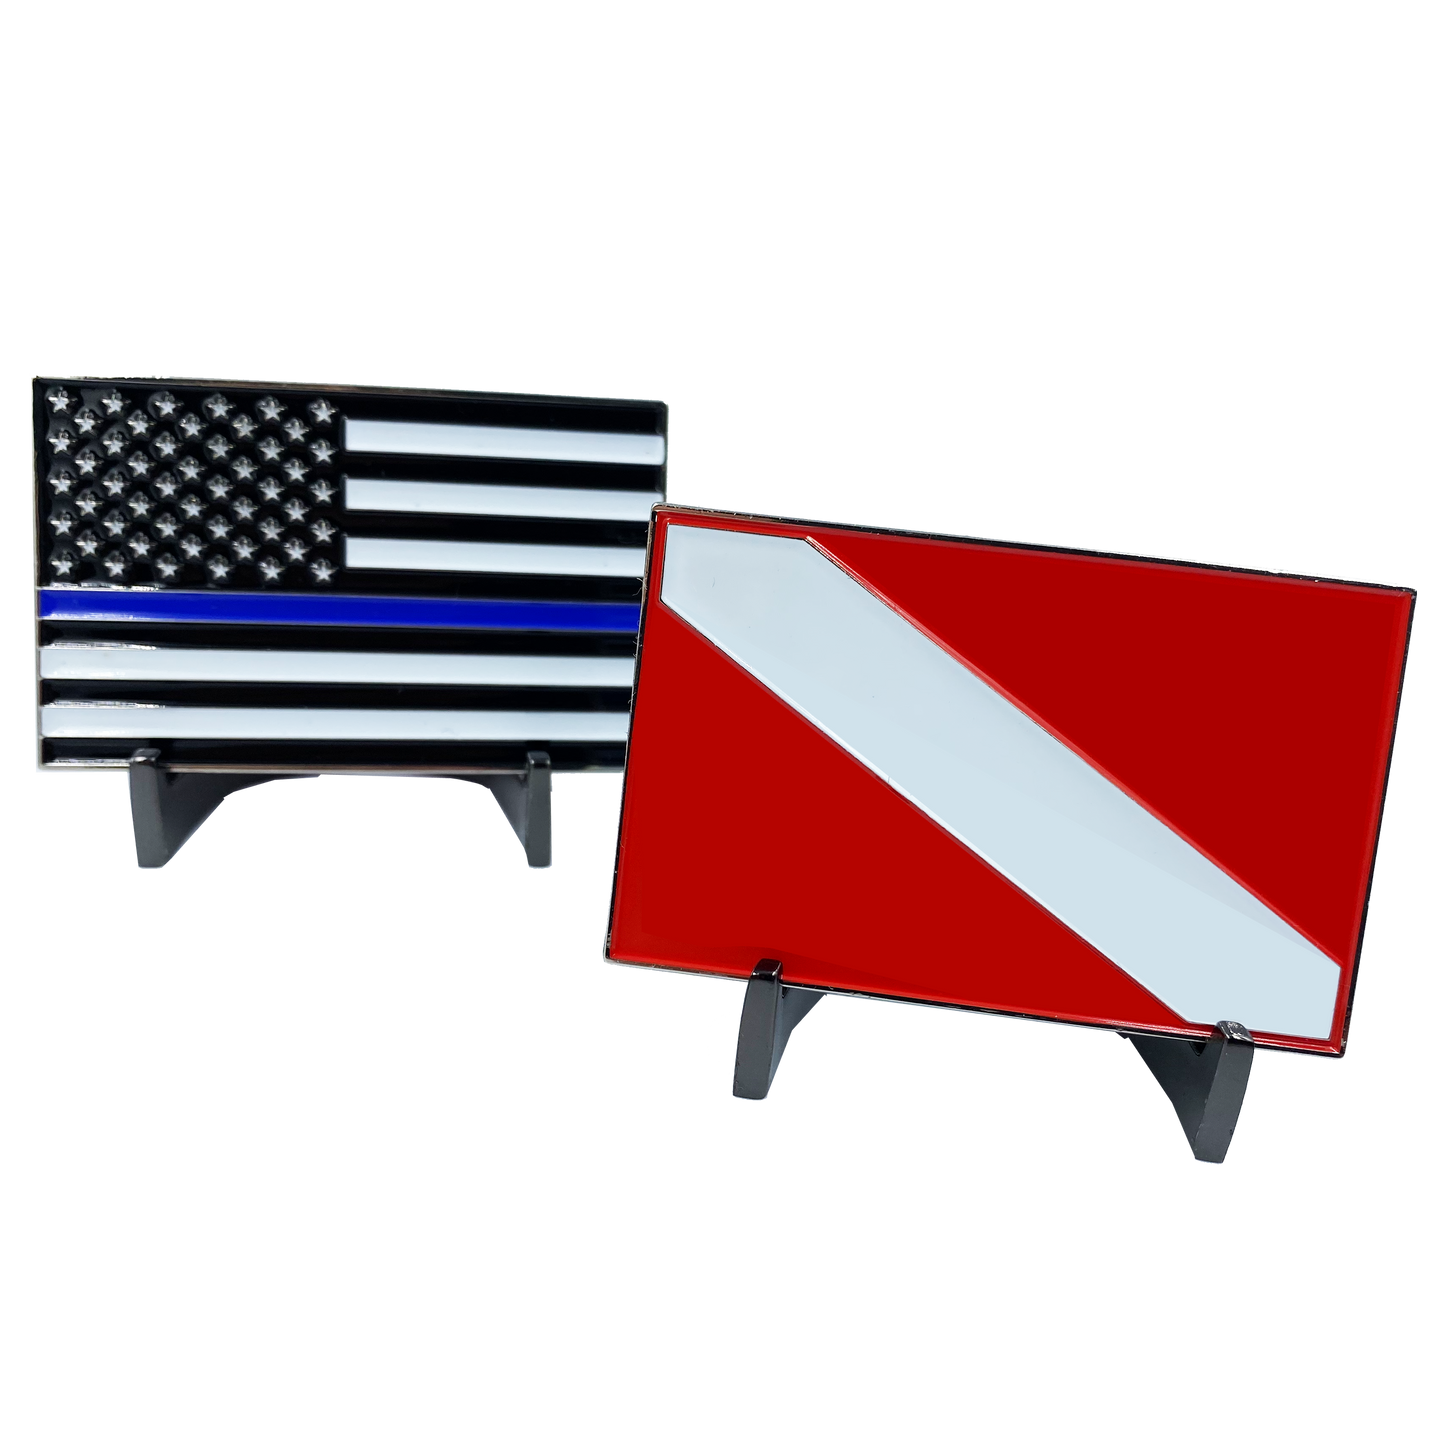 DD-010 Dive Flag Challenge Coin with Thin Blue Line U.S. Flag POLICE Rescue Diver Scuba Diving